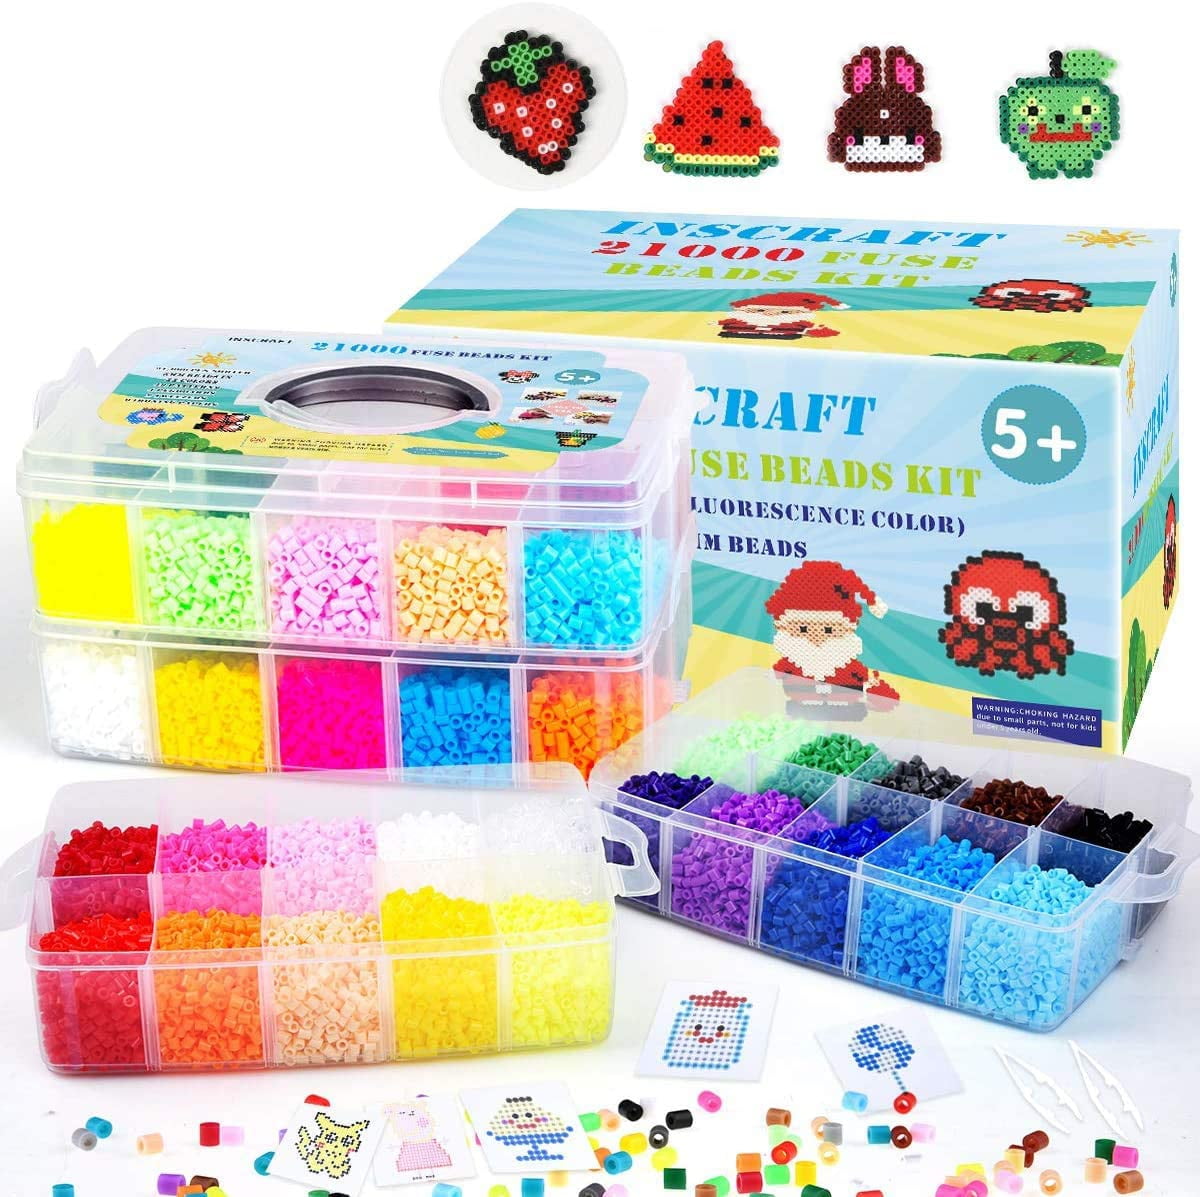 Fuse Beads, 21,000 pcs Fuse Beads Kit 22 Colors 5MM for Kids